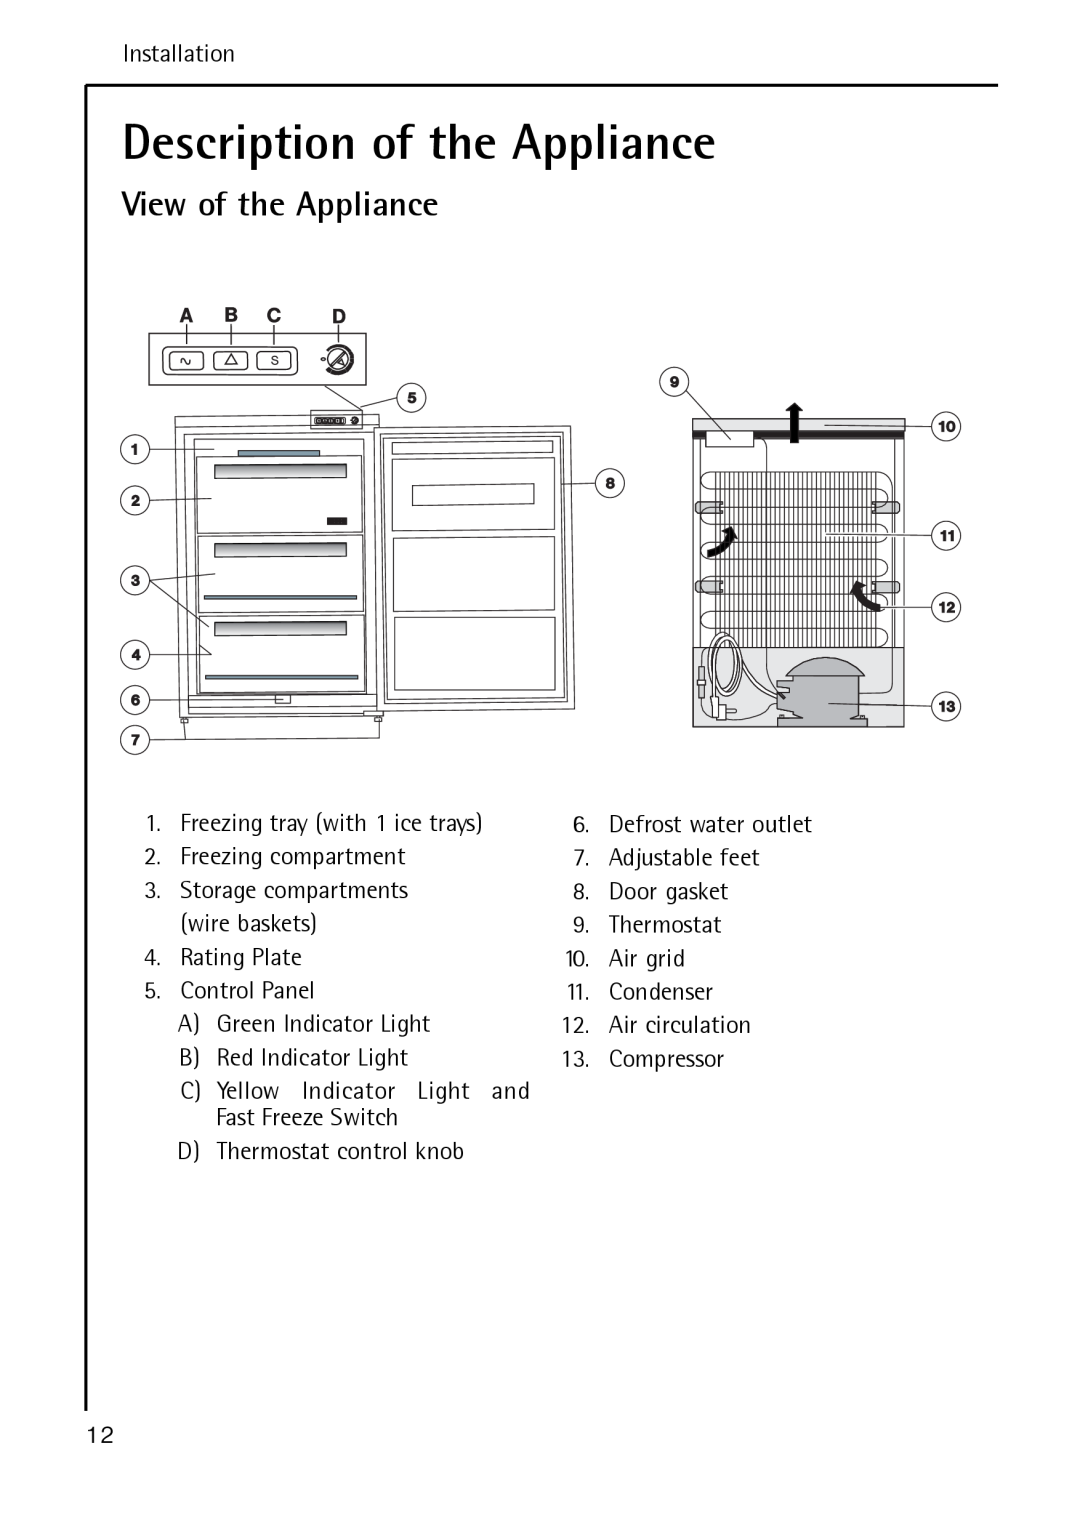 Electrolux A 40100 GS operating instructions Description of the Appliance, View of the Appliance 